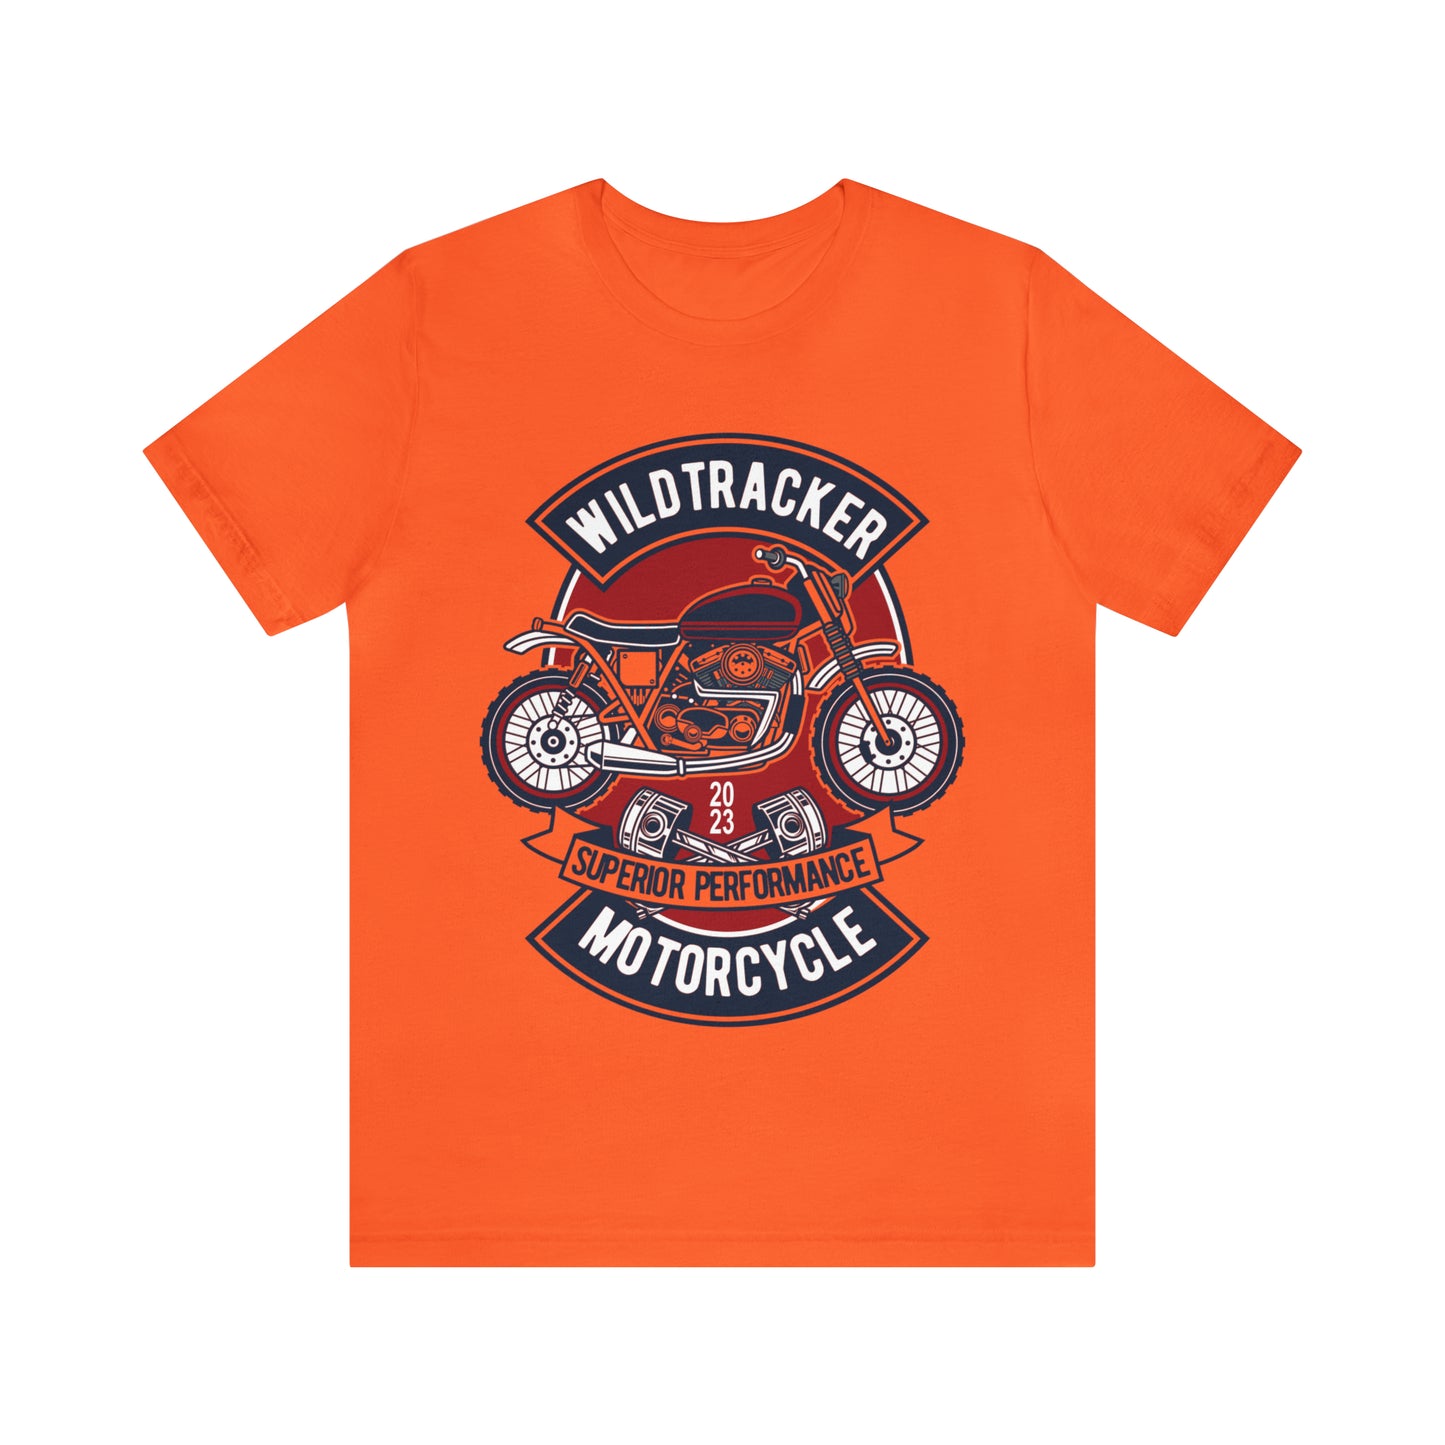 WILD TRACKER - Printed in the USA - Unisex Jersey Short Sleeve Tee